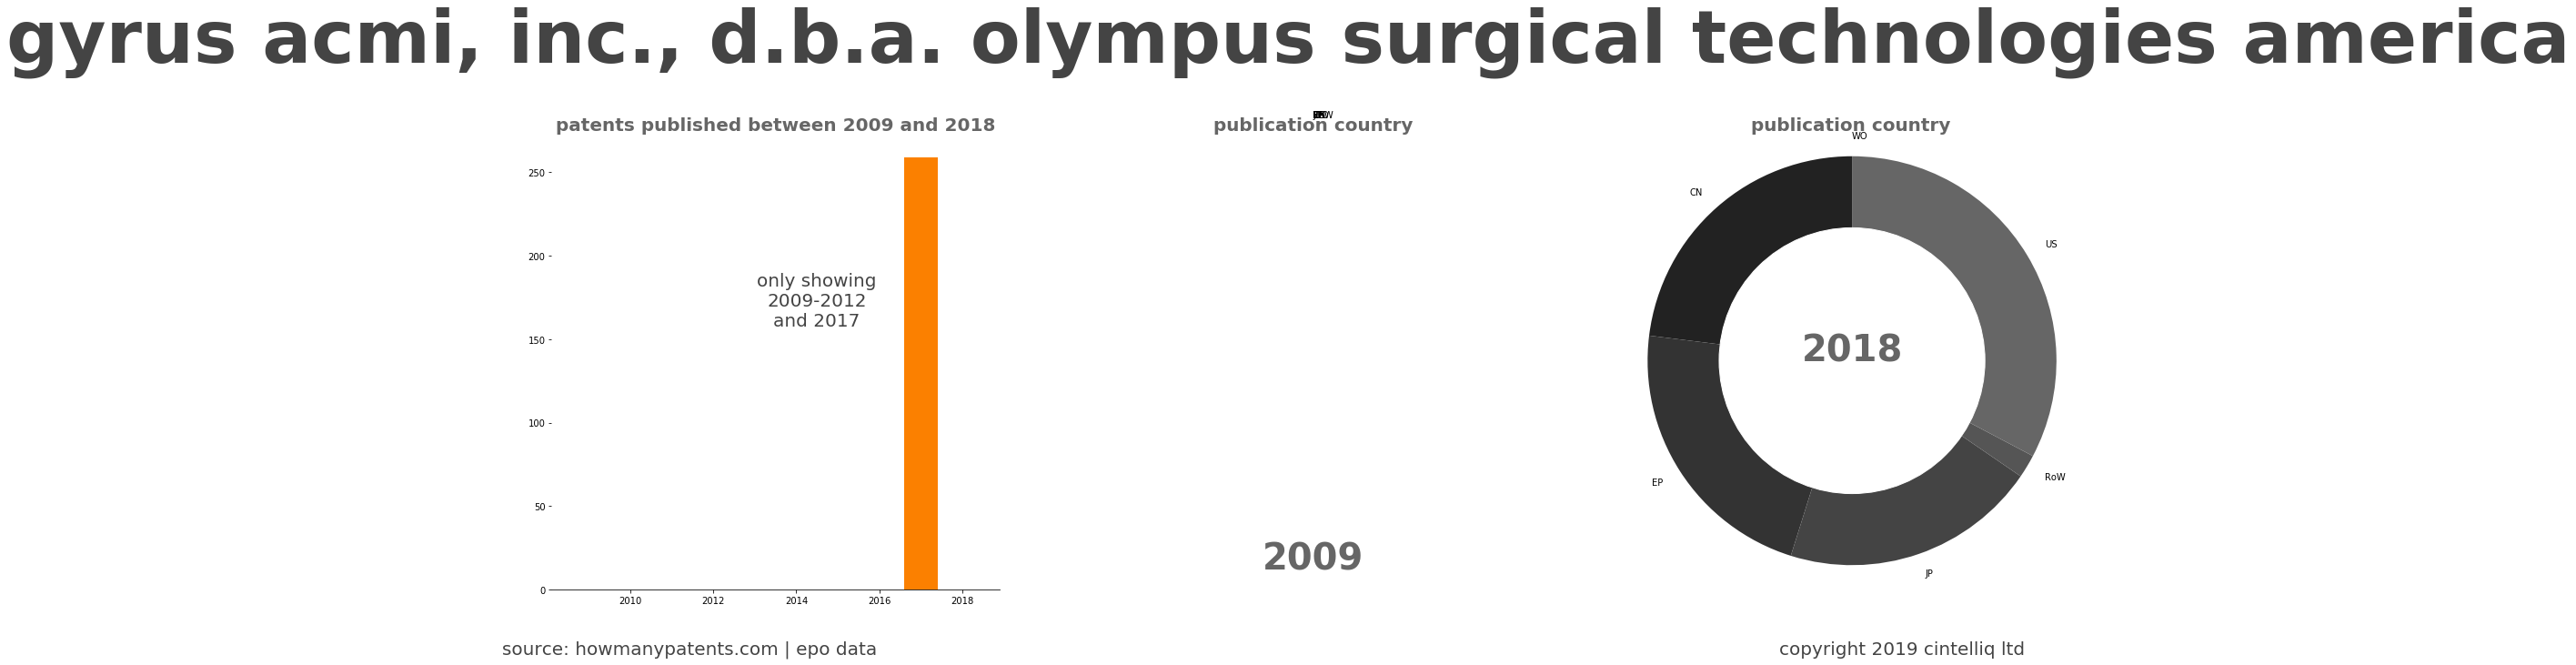 summary of patents for Gyrus Acmi, Inc., D.B.A. Olympus Surgical Technologies America